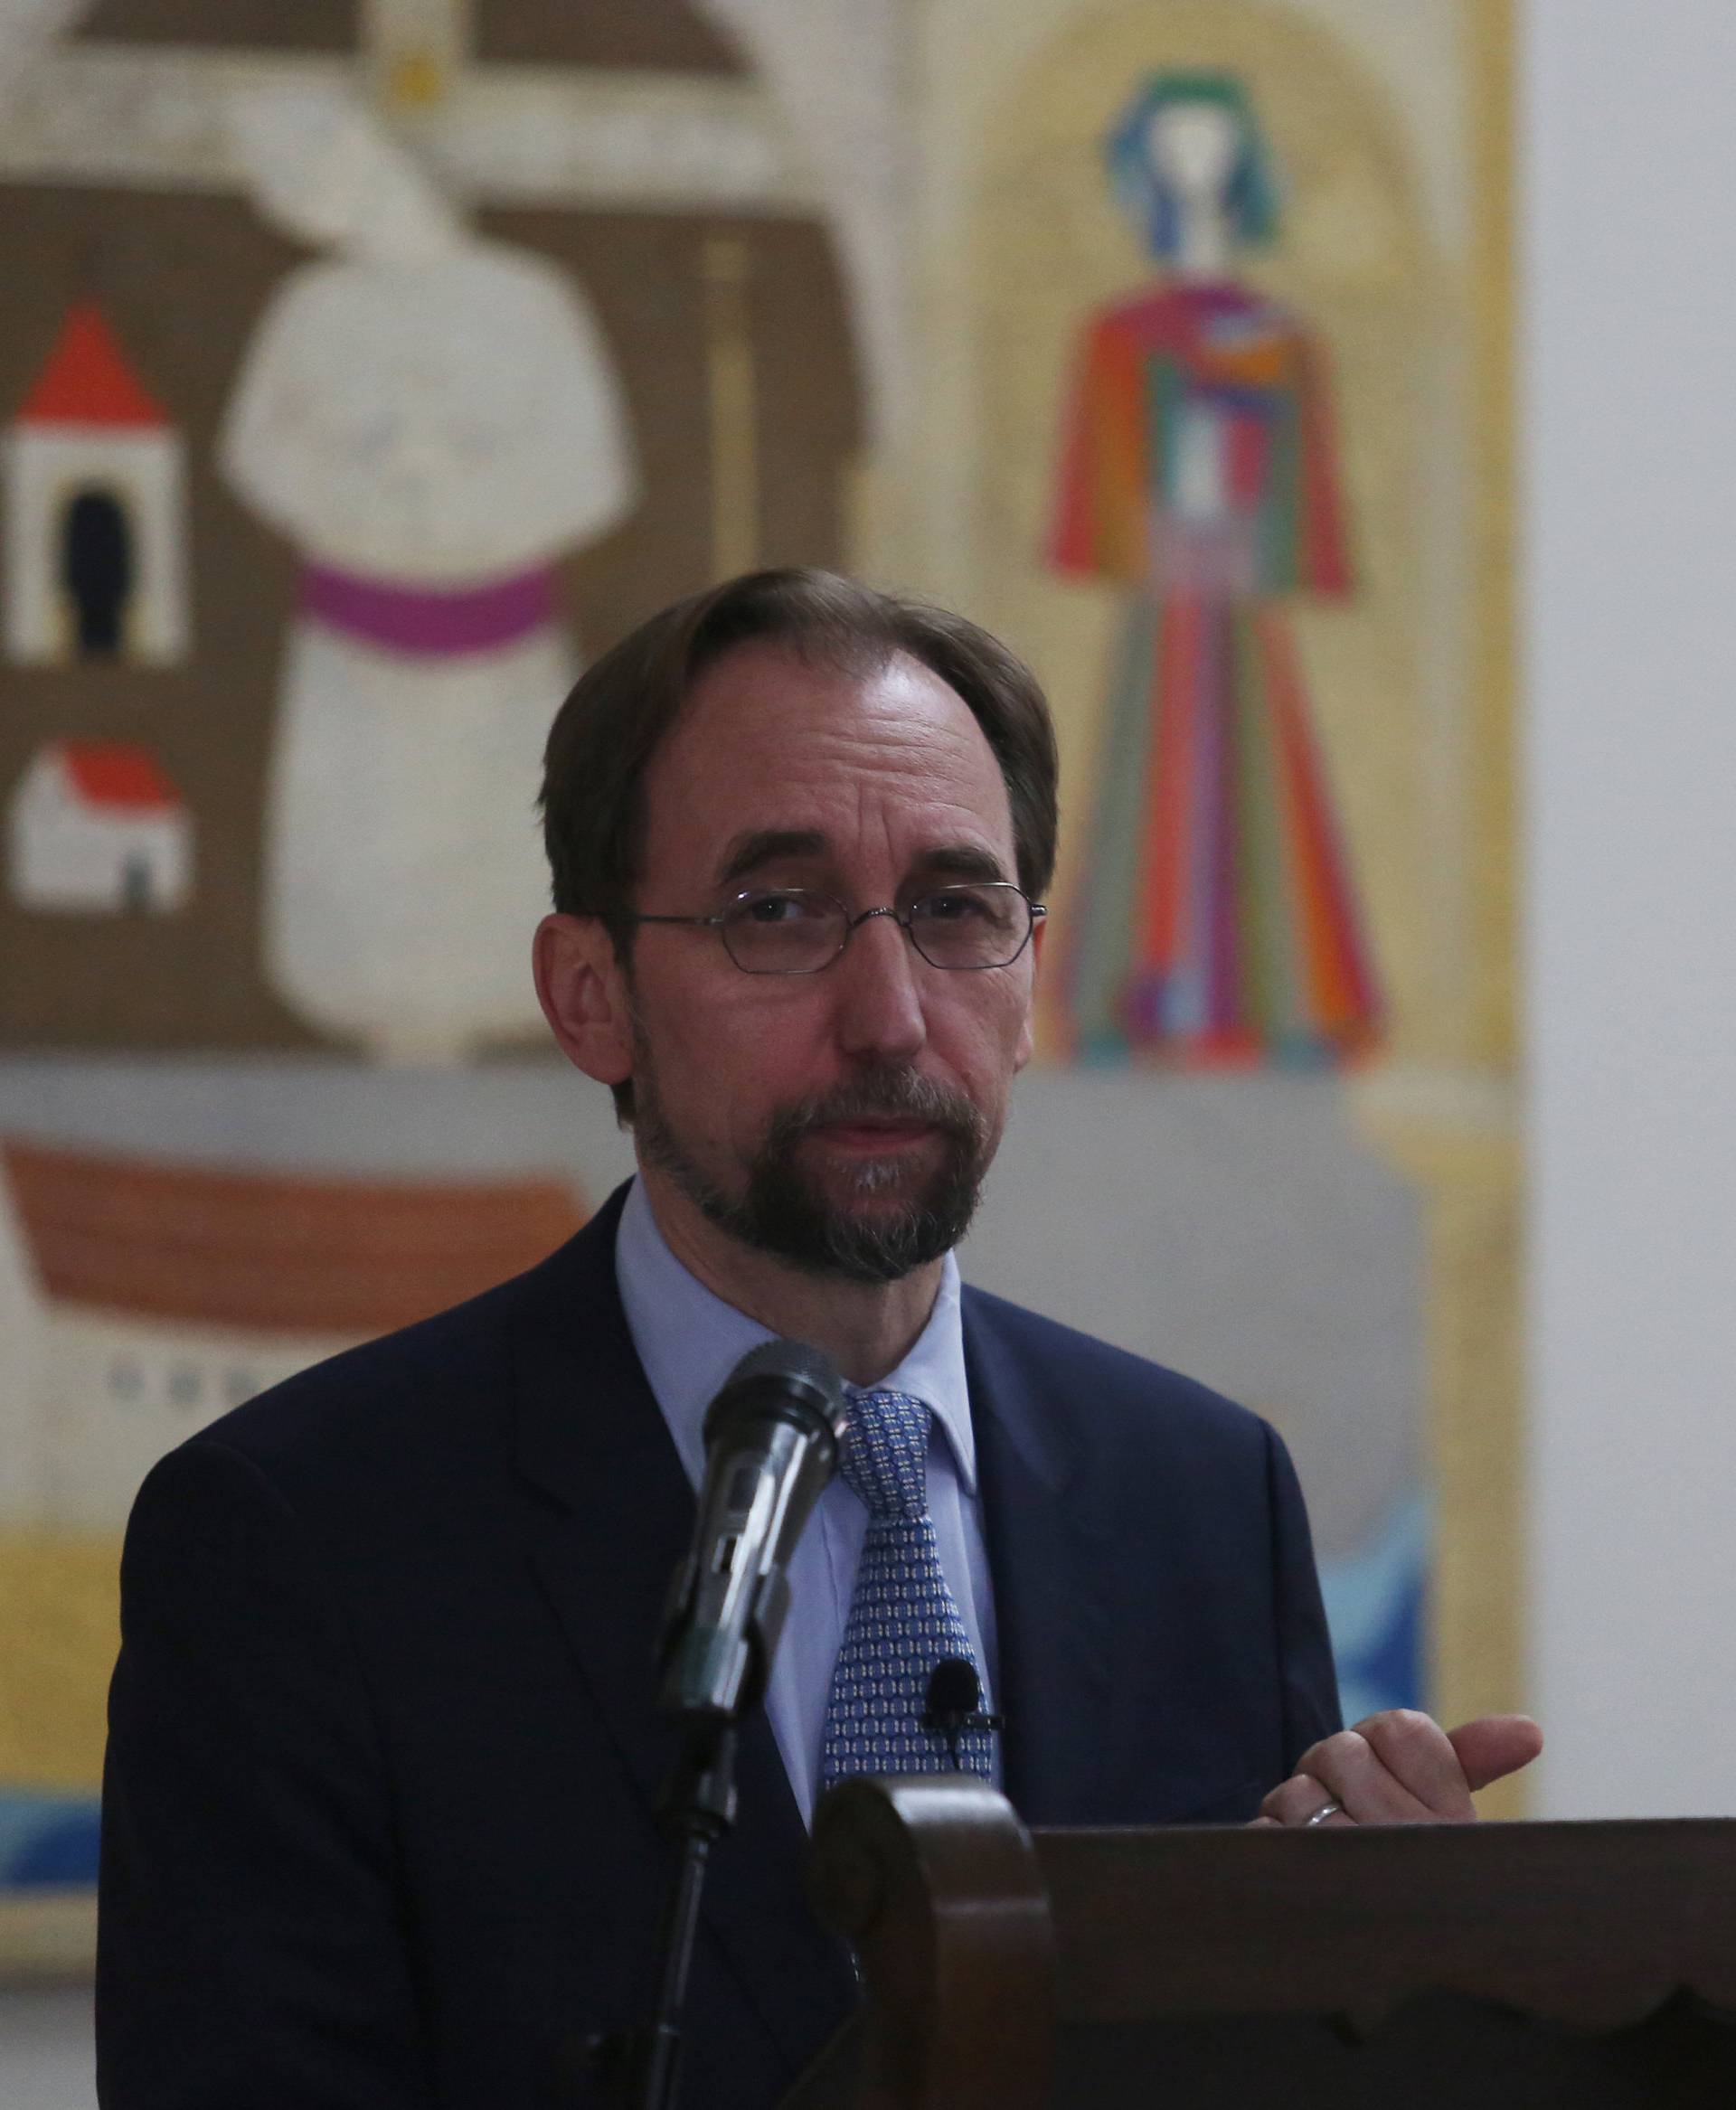 U.N. High Commissioner for Human Rights Hussein speaks at the Central American University in San Salvador